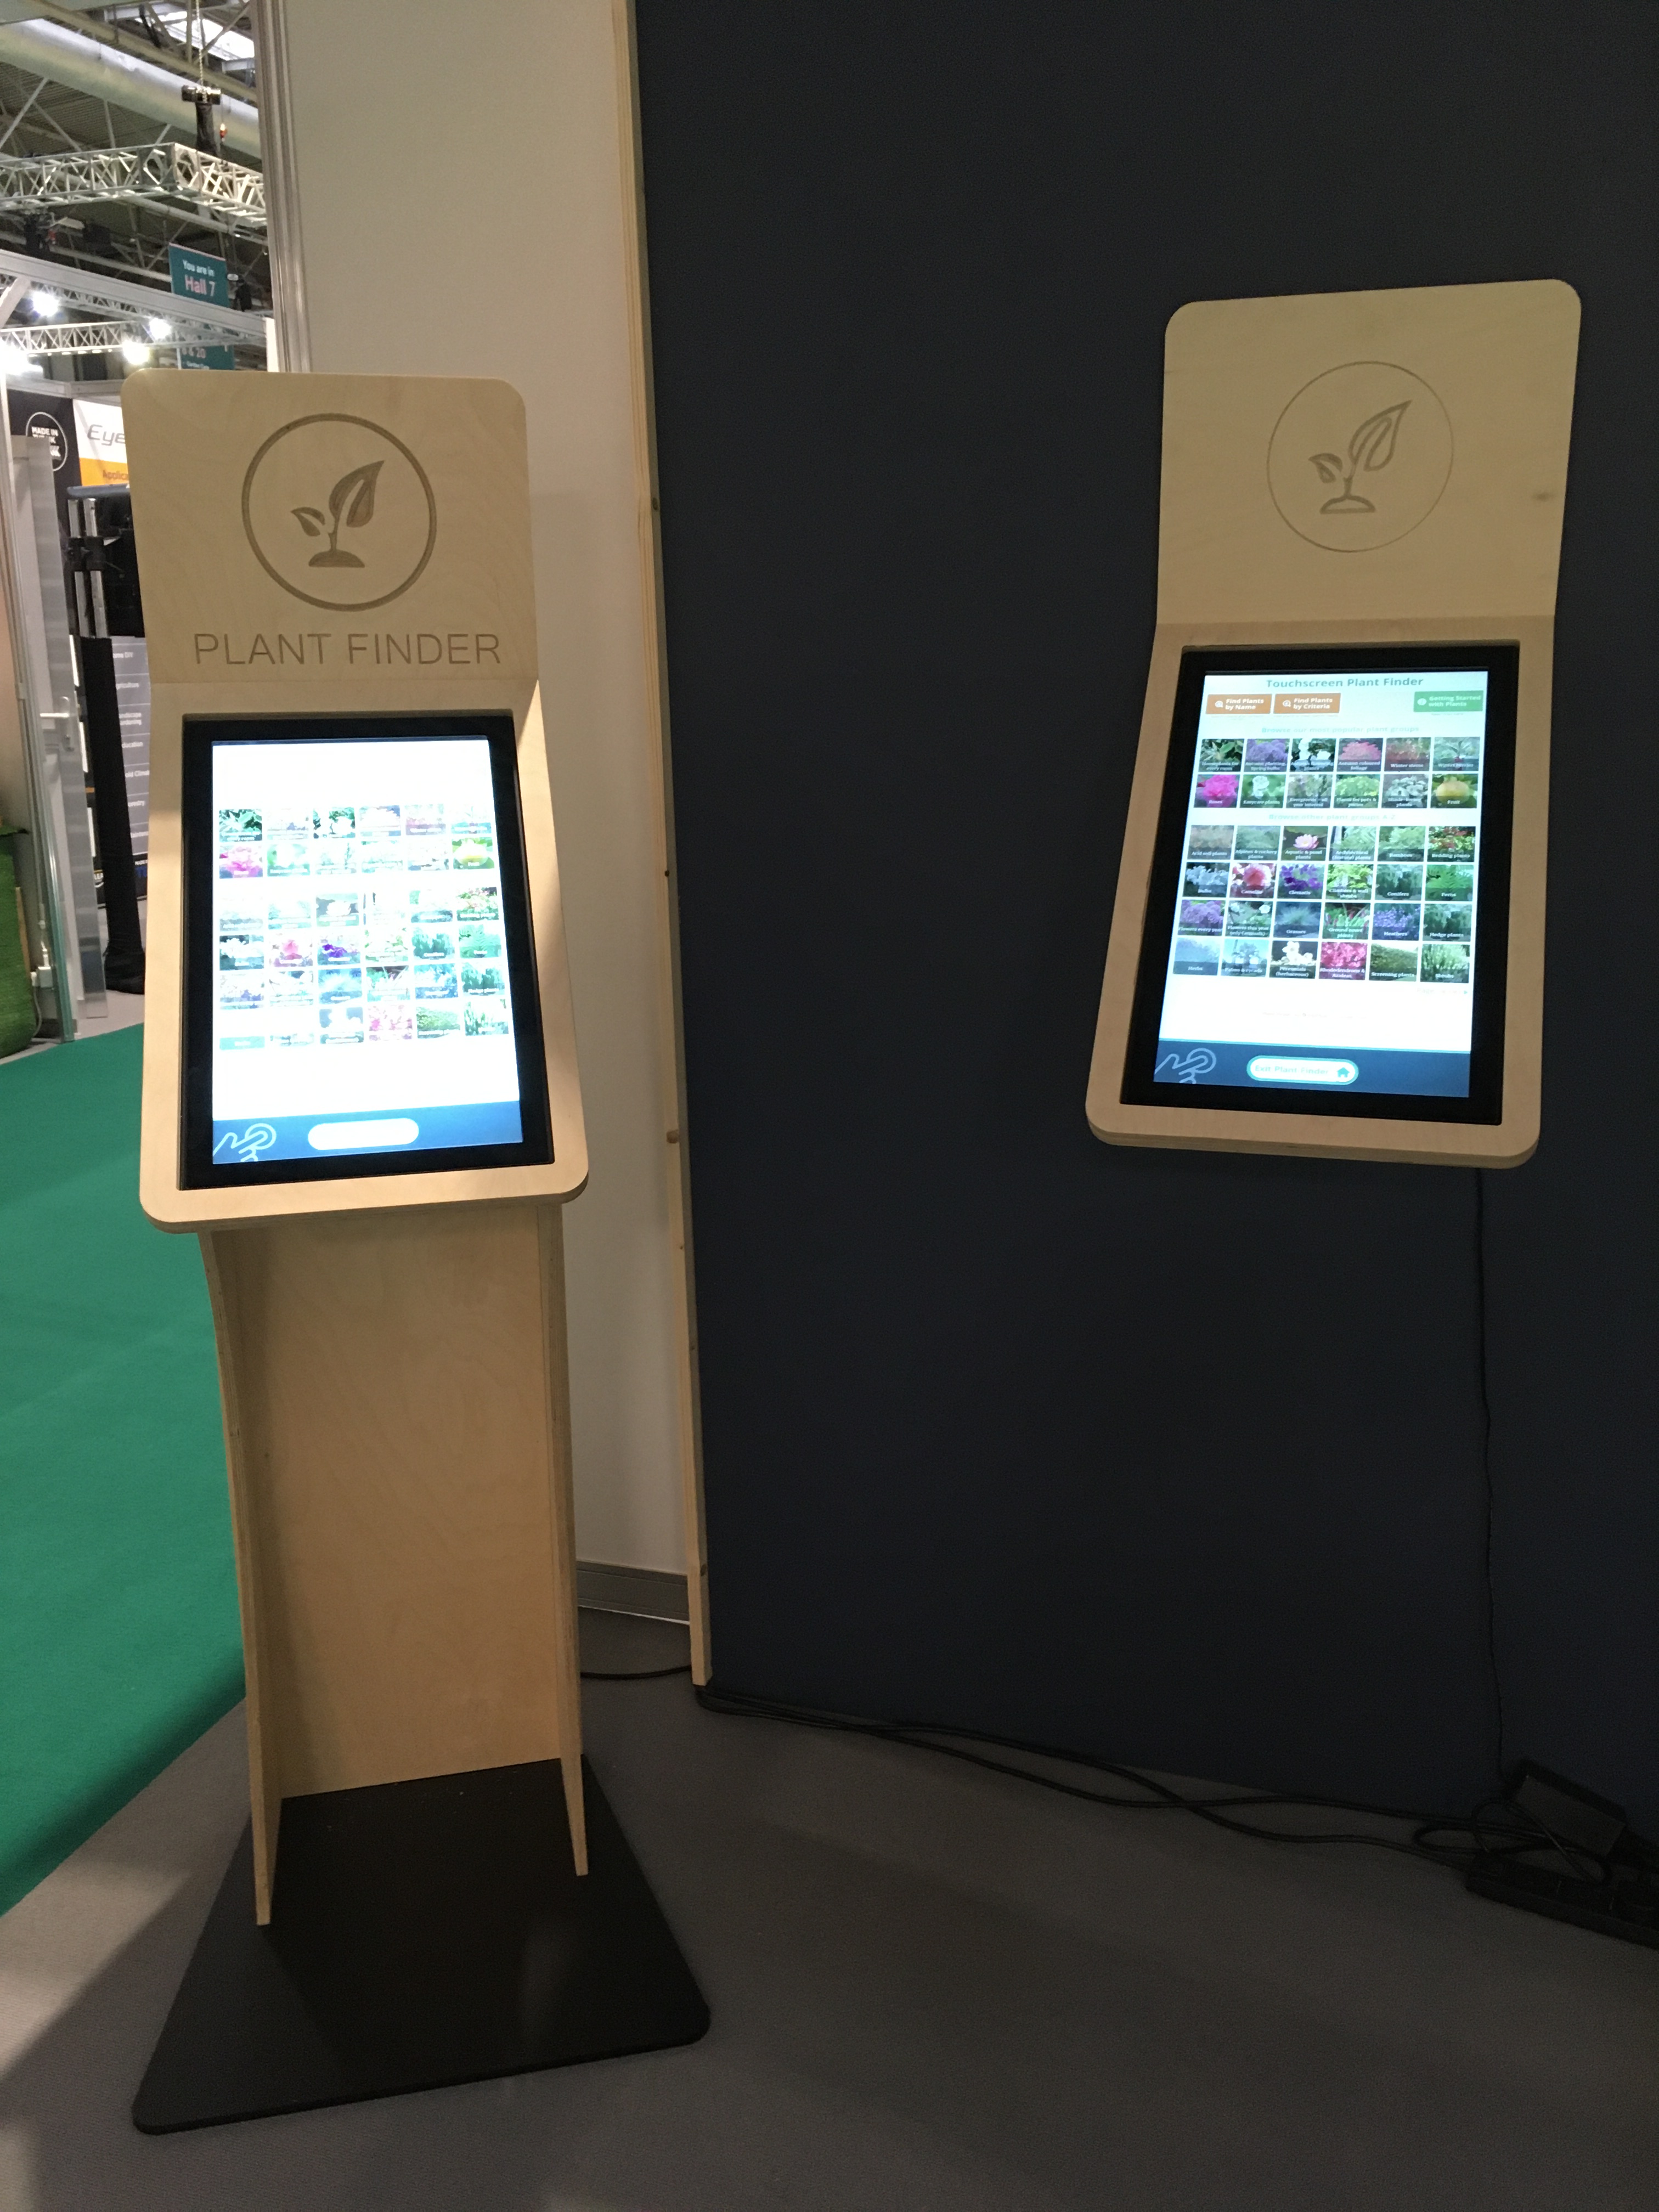 Freestanding/mobile, and wall-mounted 21-inch displays